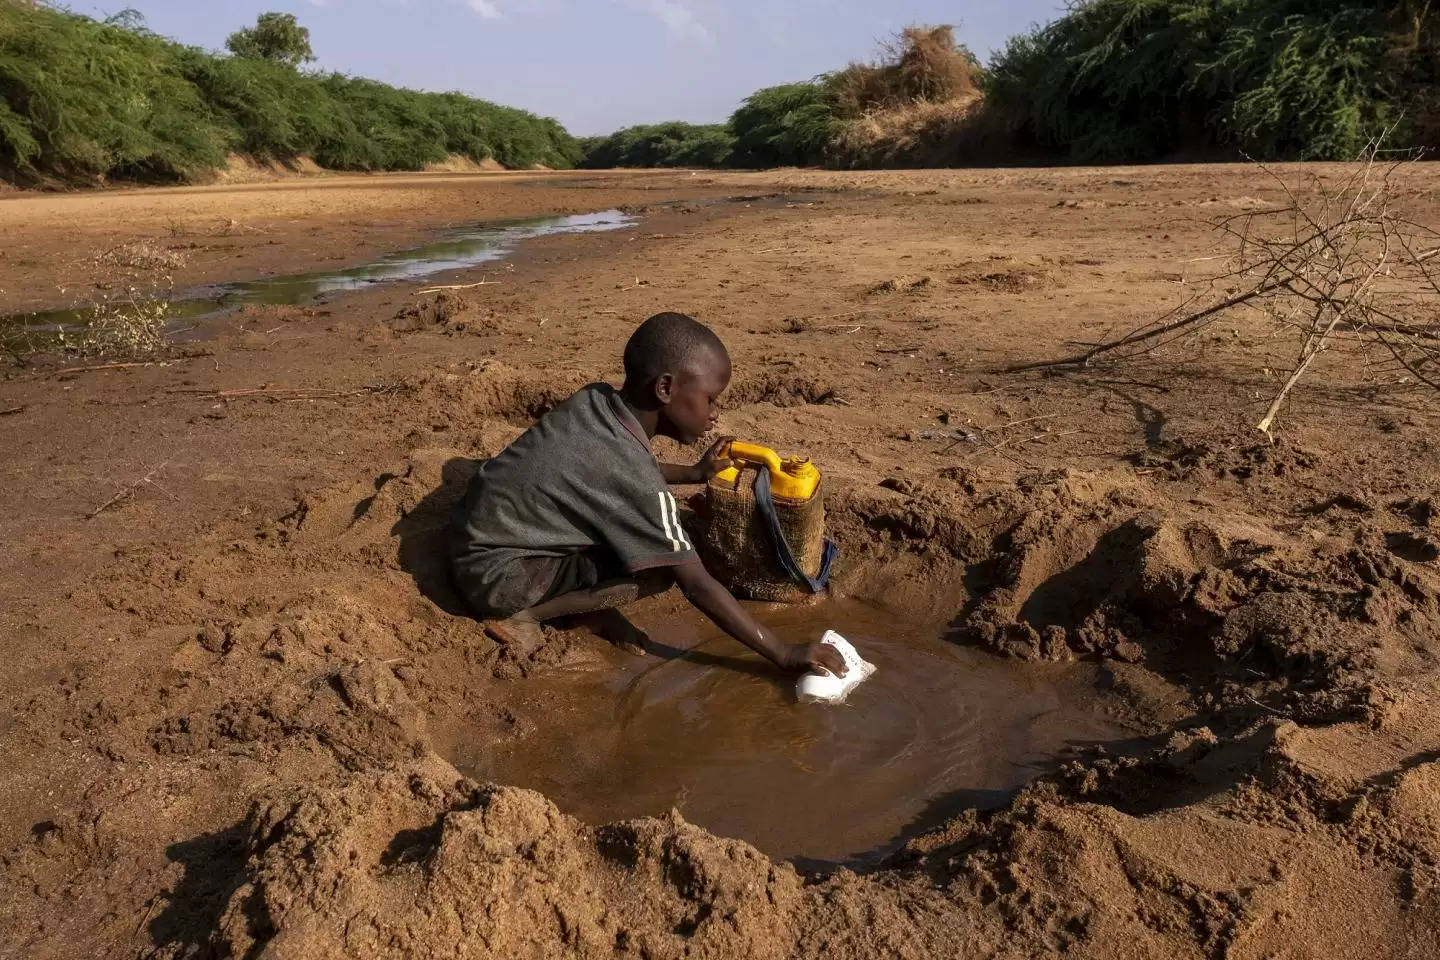 36.1 million people affected by severe drought in the Horn of Africa